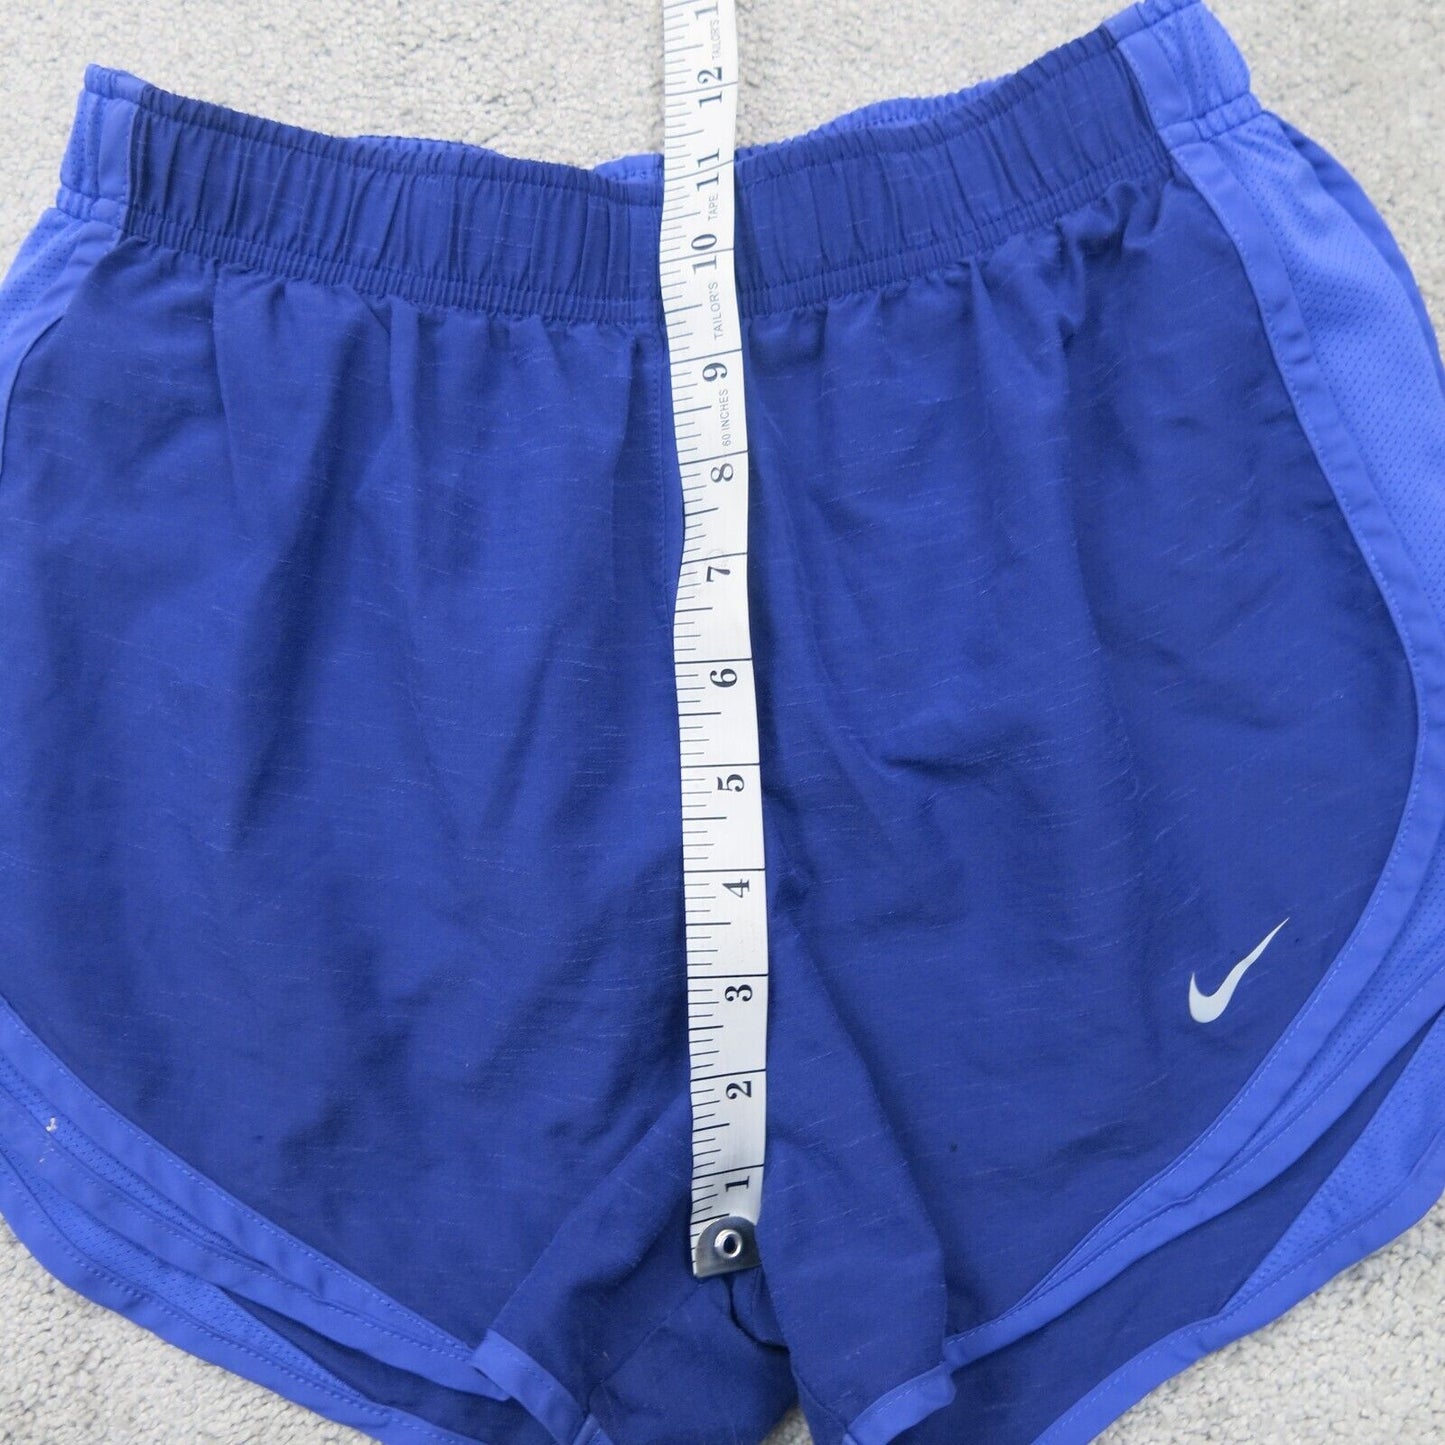 Nike Dri Fit Womens Activewear Athletic Running Shorts Mid Rise Blue Size Small